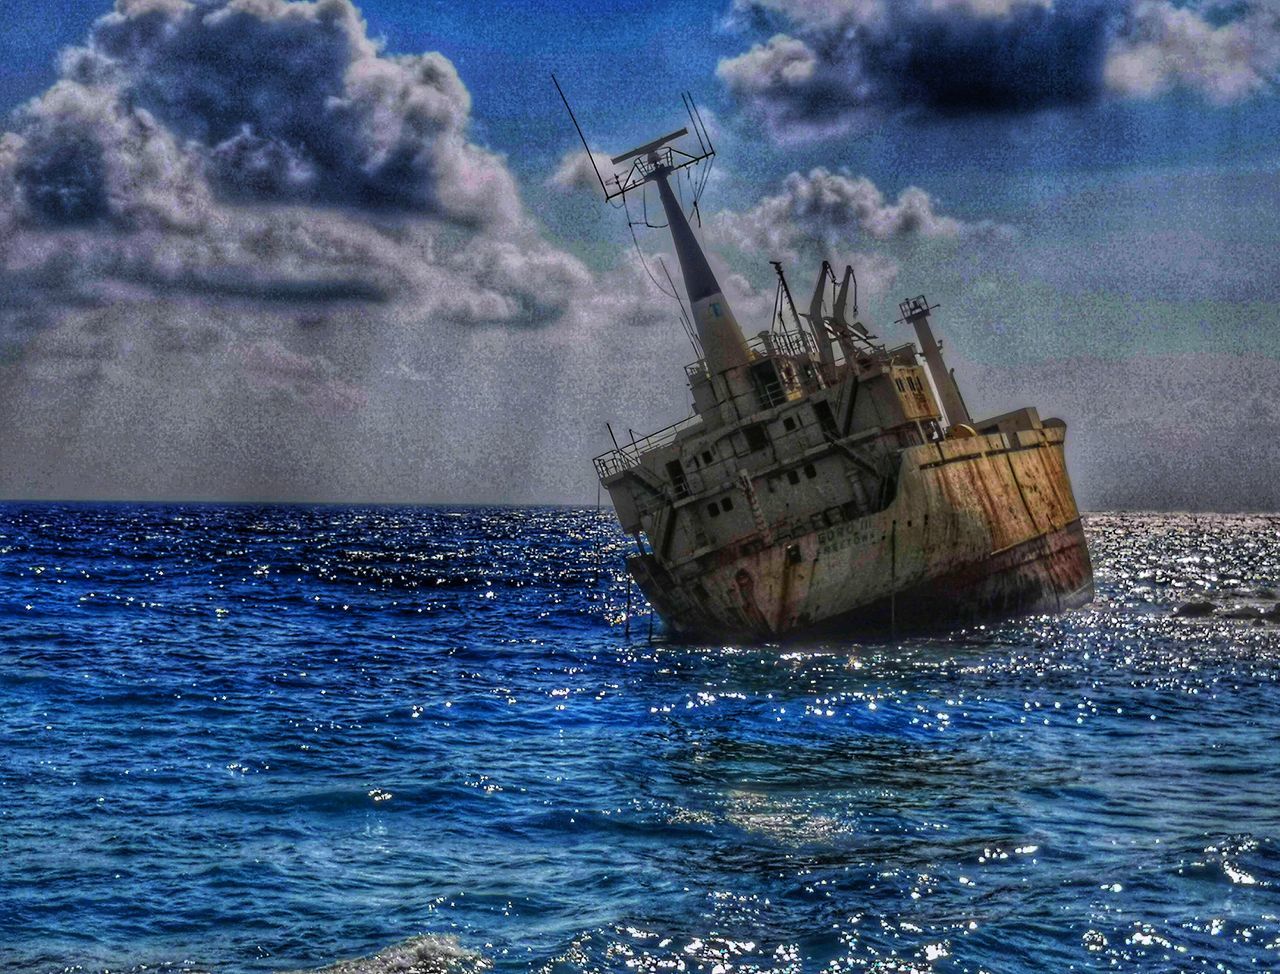 ABANDONED SHIP IN SEA